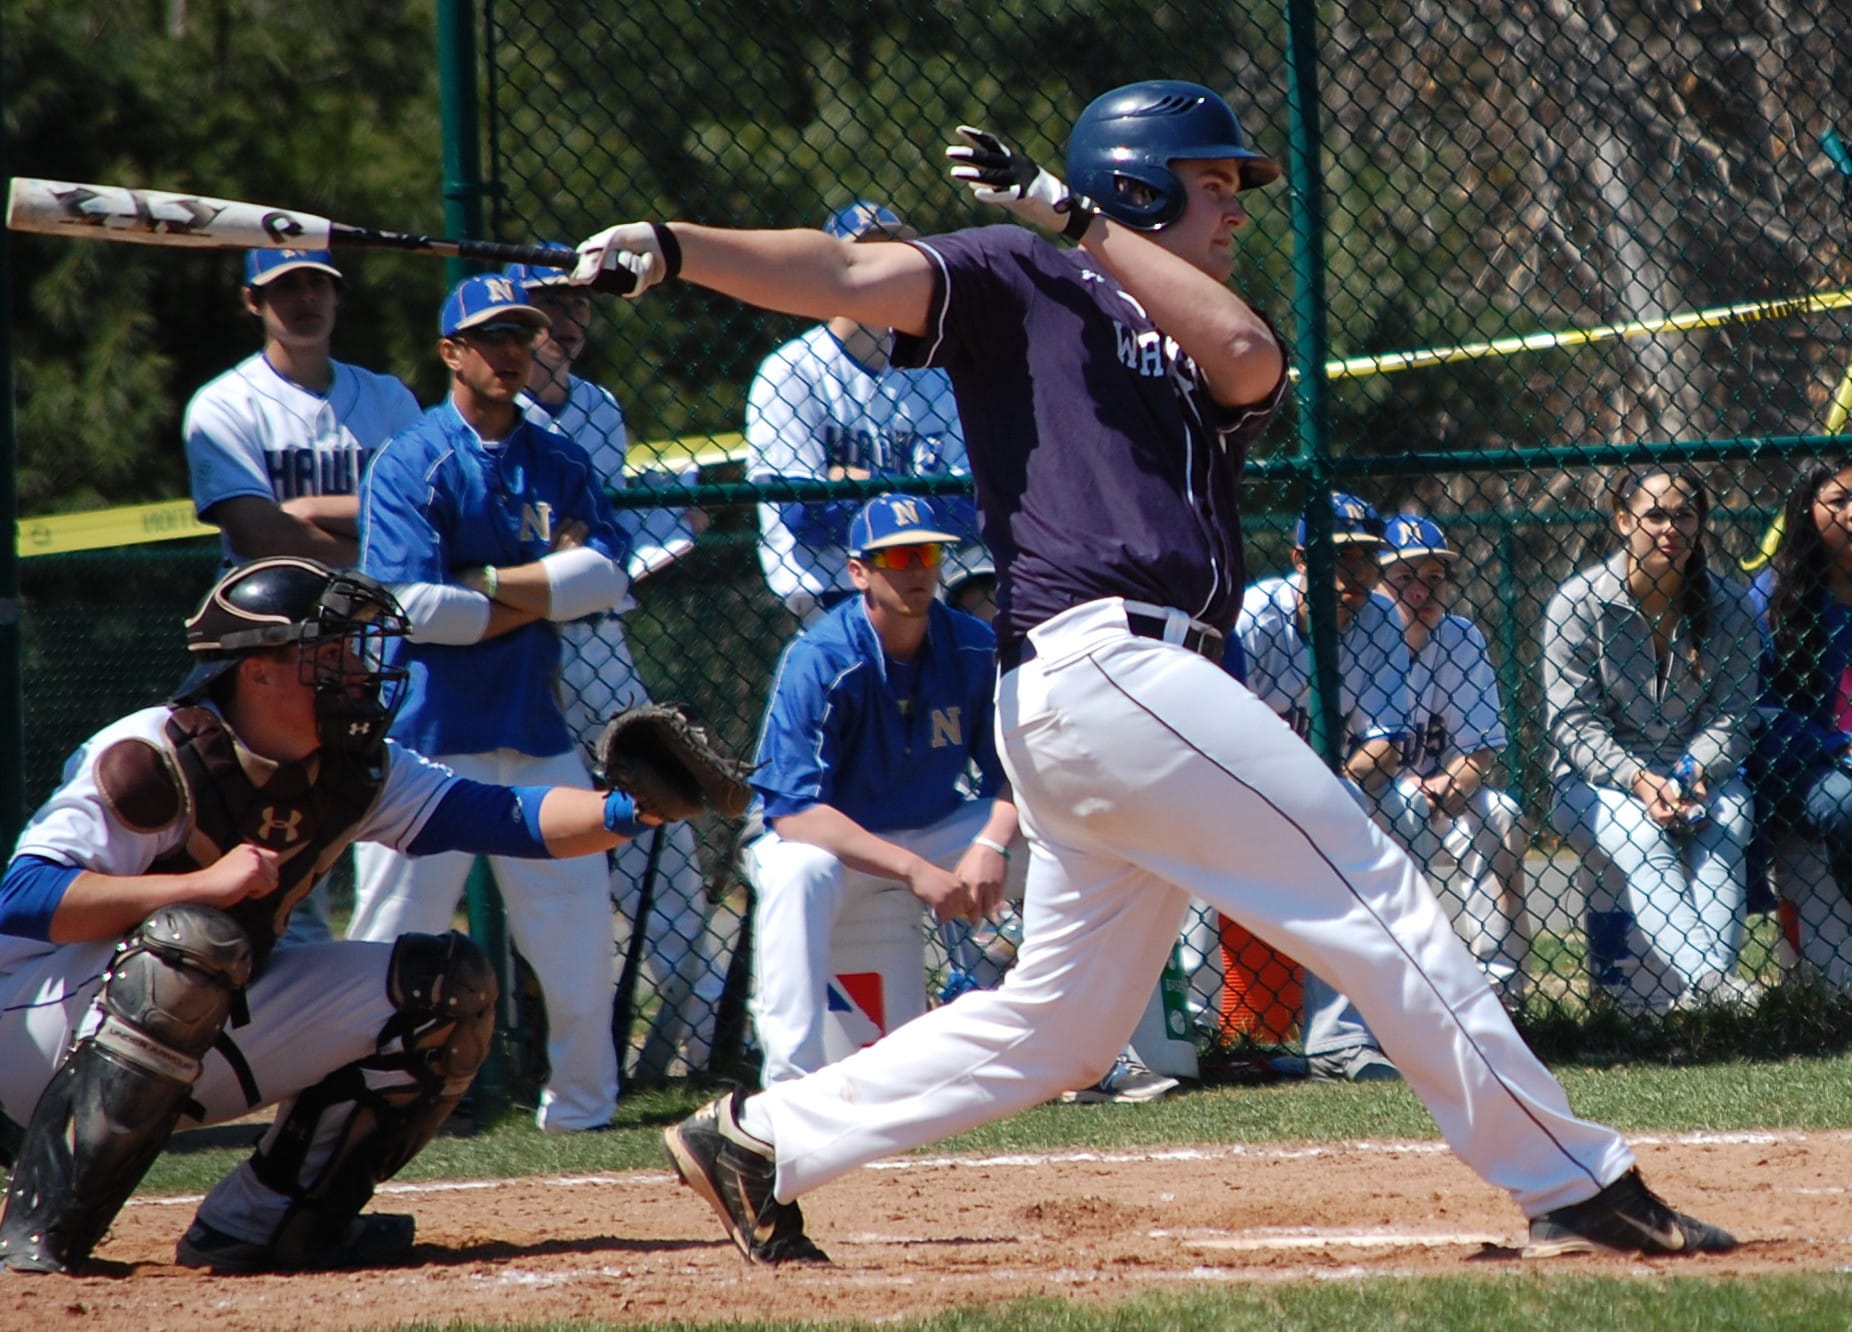 Bryan Porter crushes 2 run double in the 3rd inning Saturday!